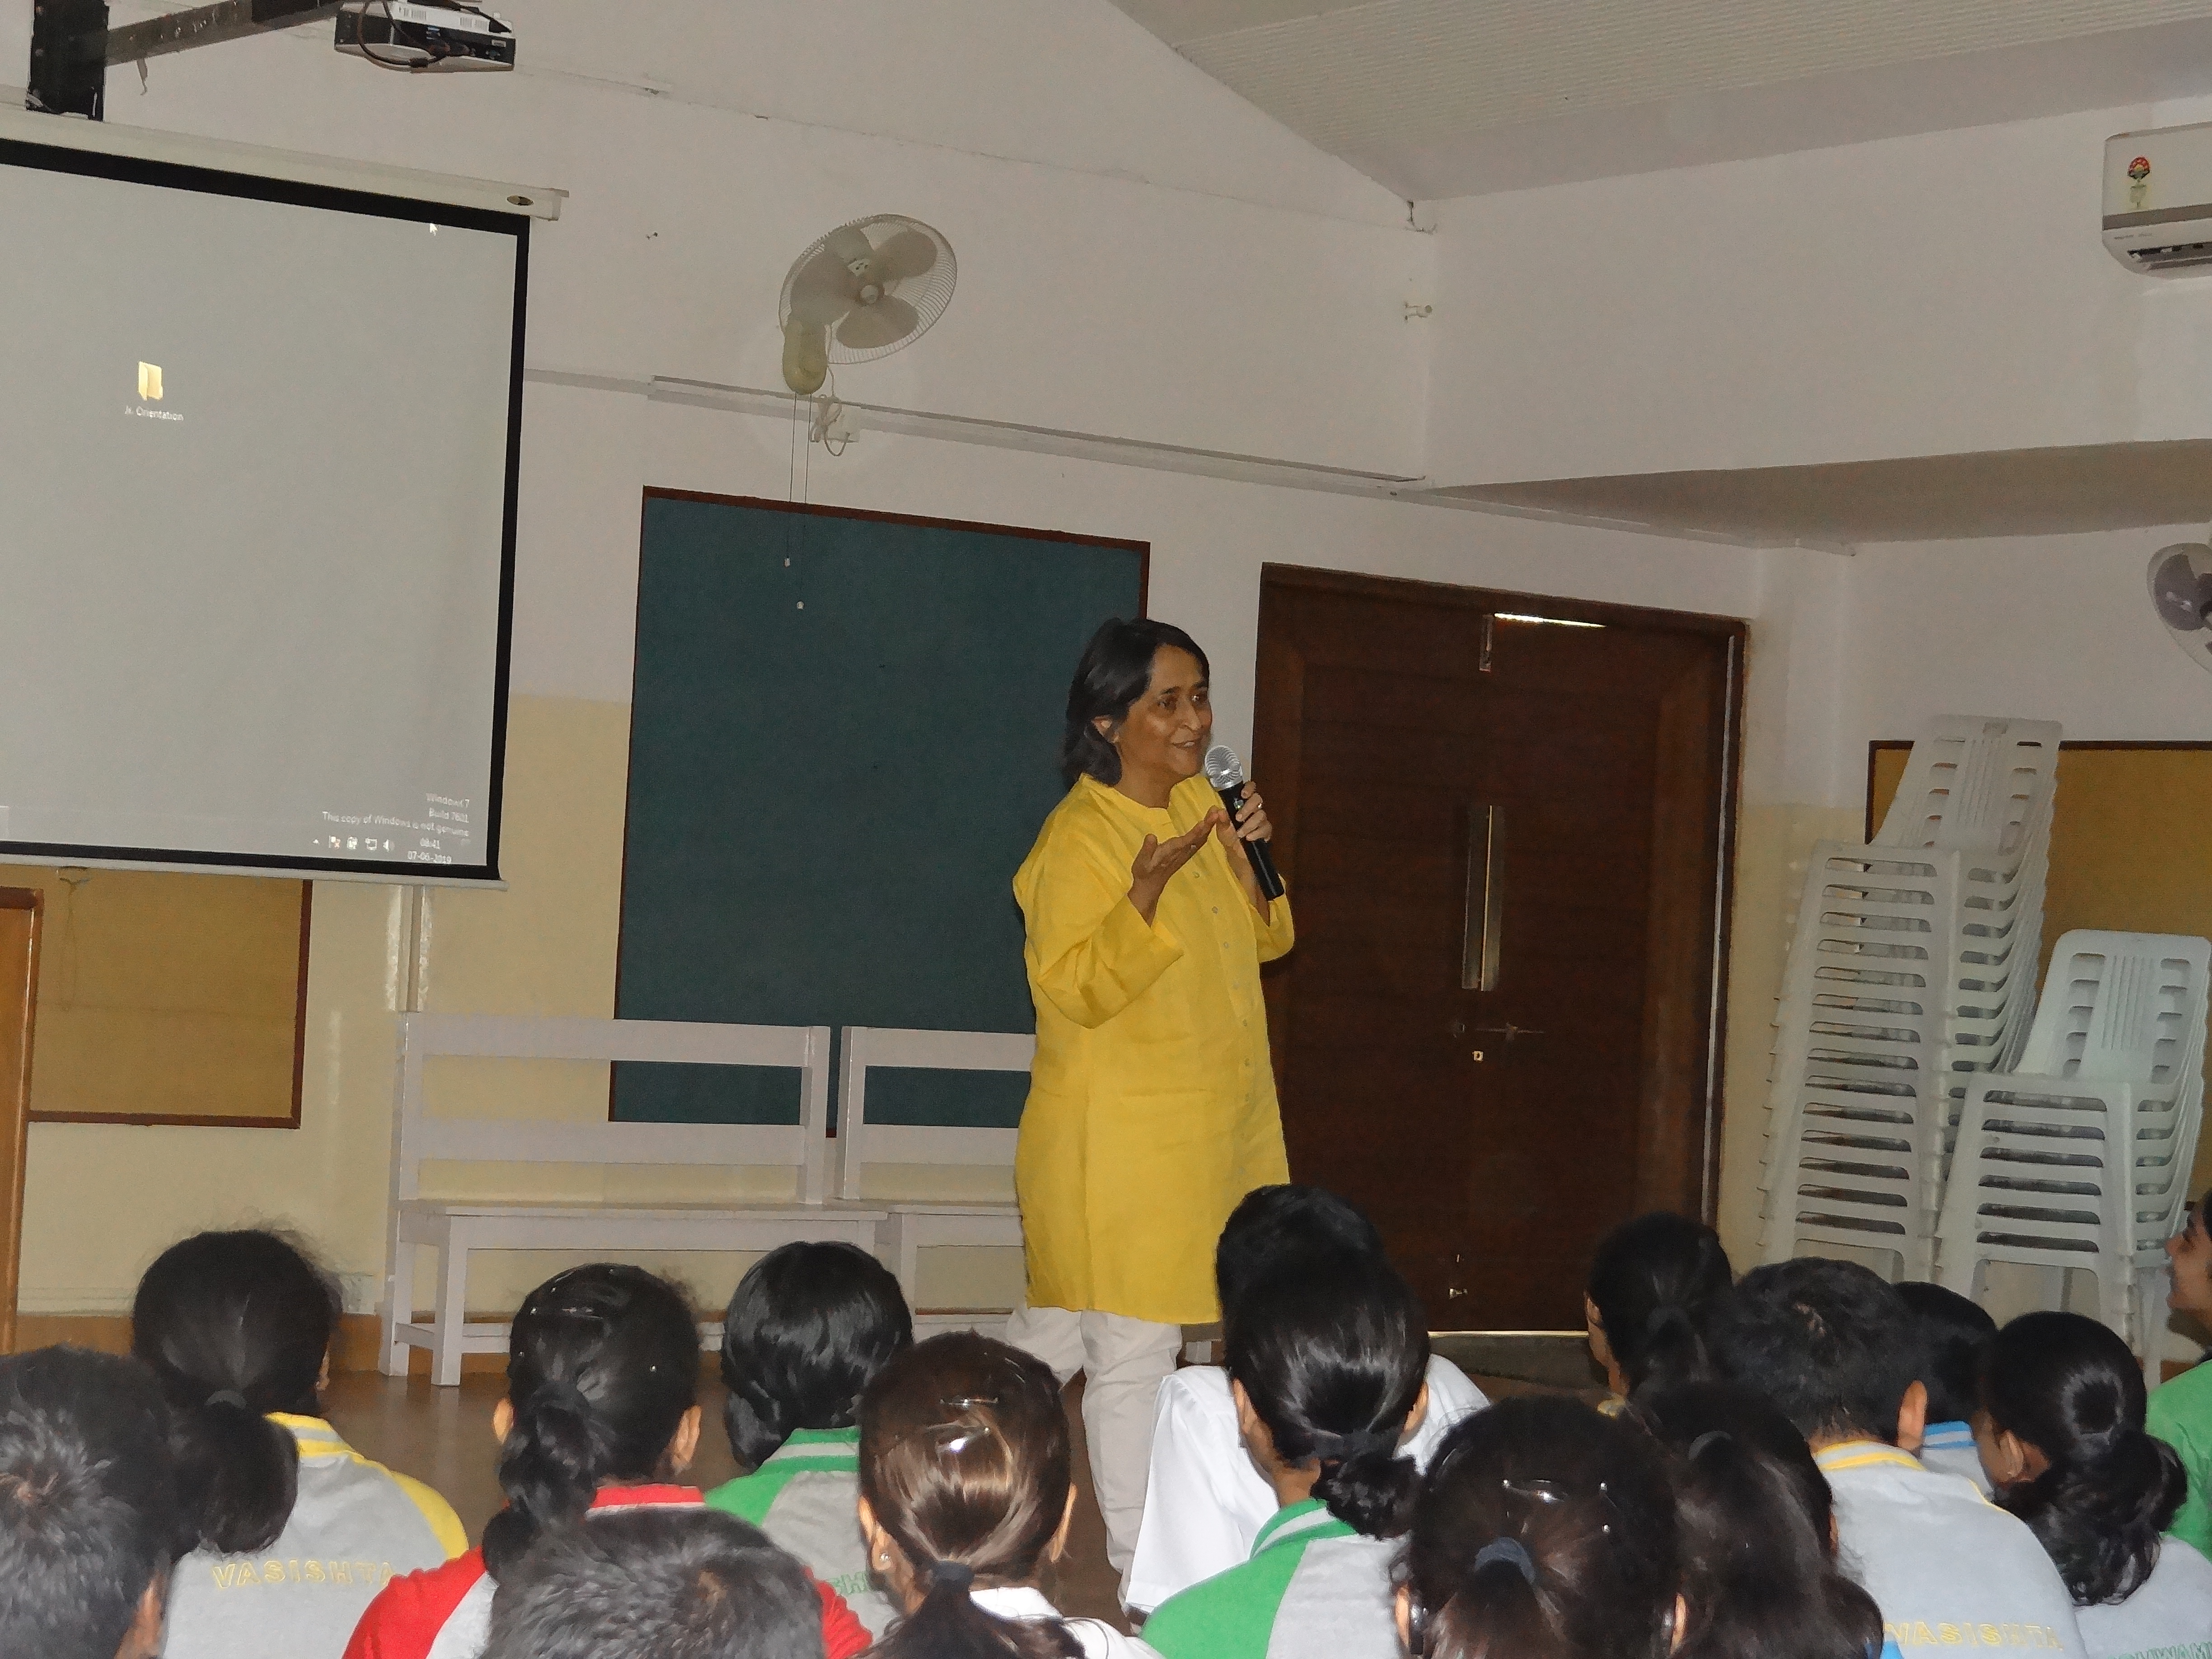 Talk on Environment by Ms. Poonam B. Kasturi from Daily Dump